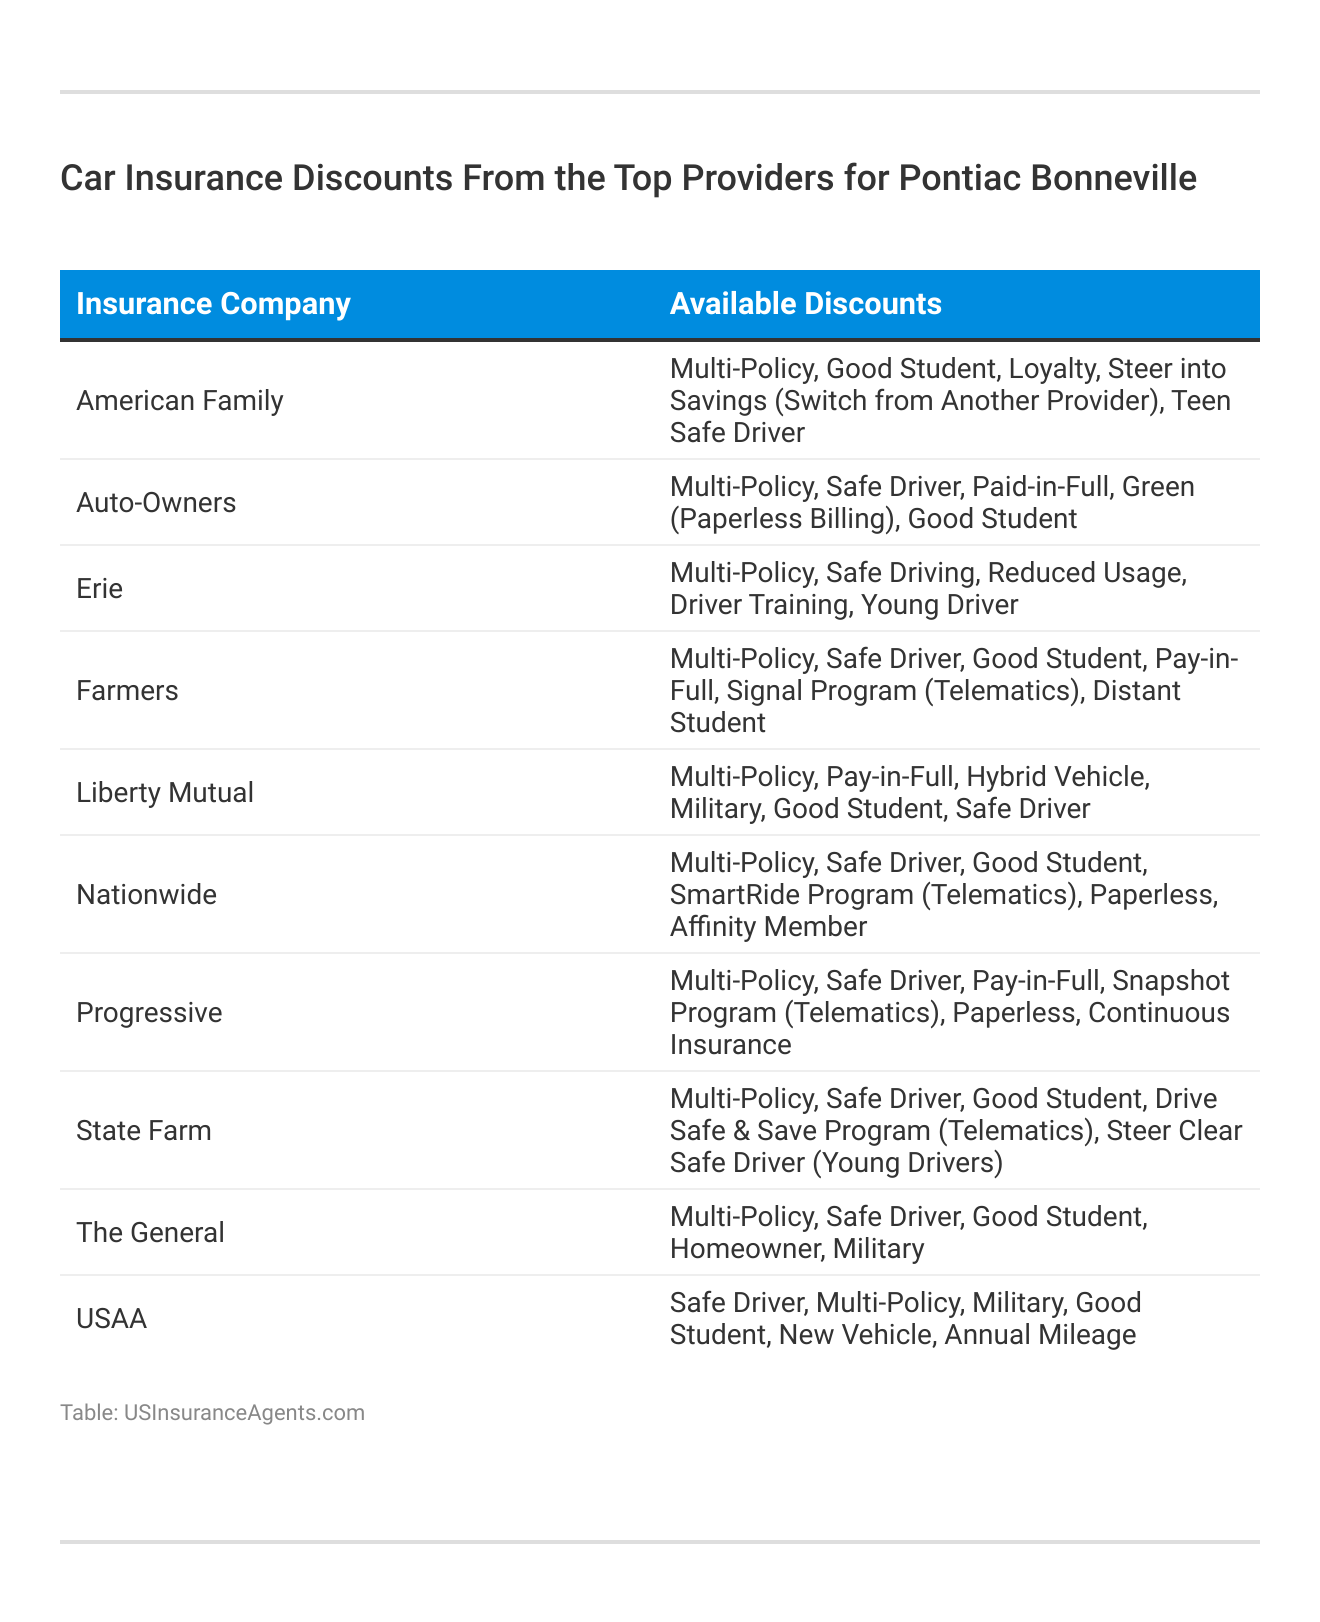 <h3>Car Insurance Discounts From the Top Providers for Pontiac Bonneville</h3>